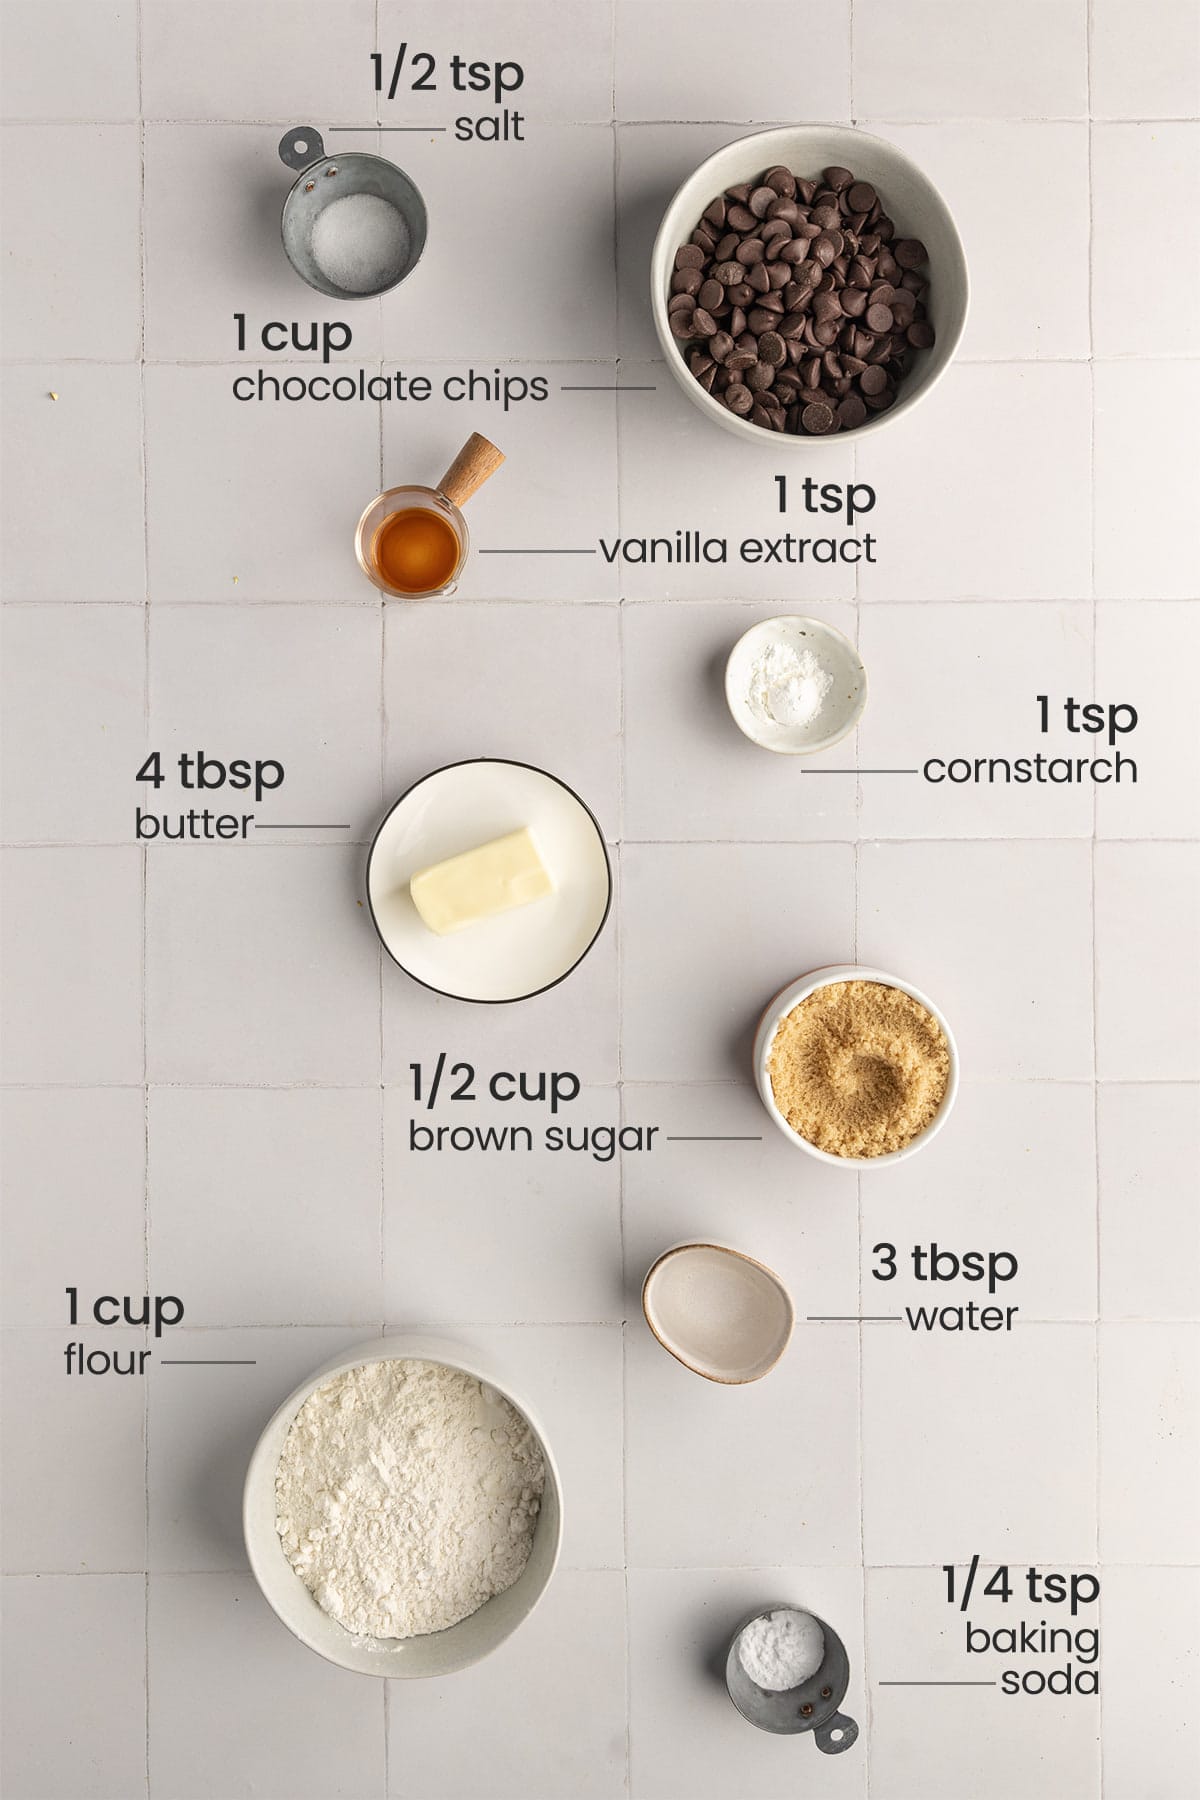 ingredients for eggless chocolate chip cookies - salt, chocolate chips, vanilla extract, butter, cornstarch, brown sugar, water, flour, baking soda